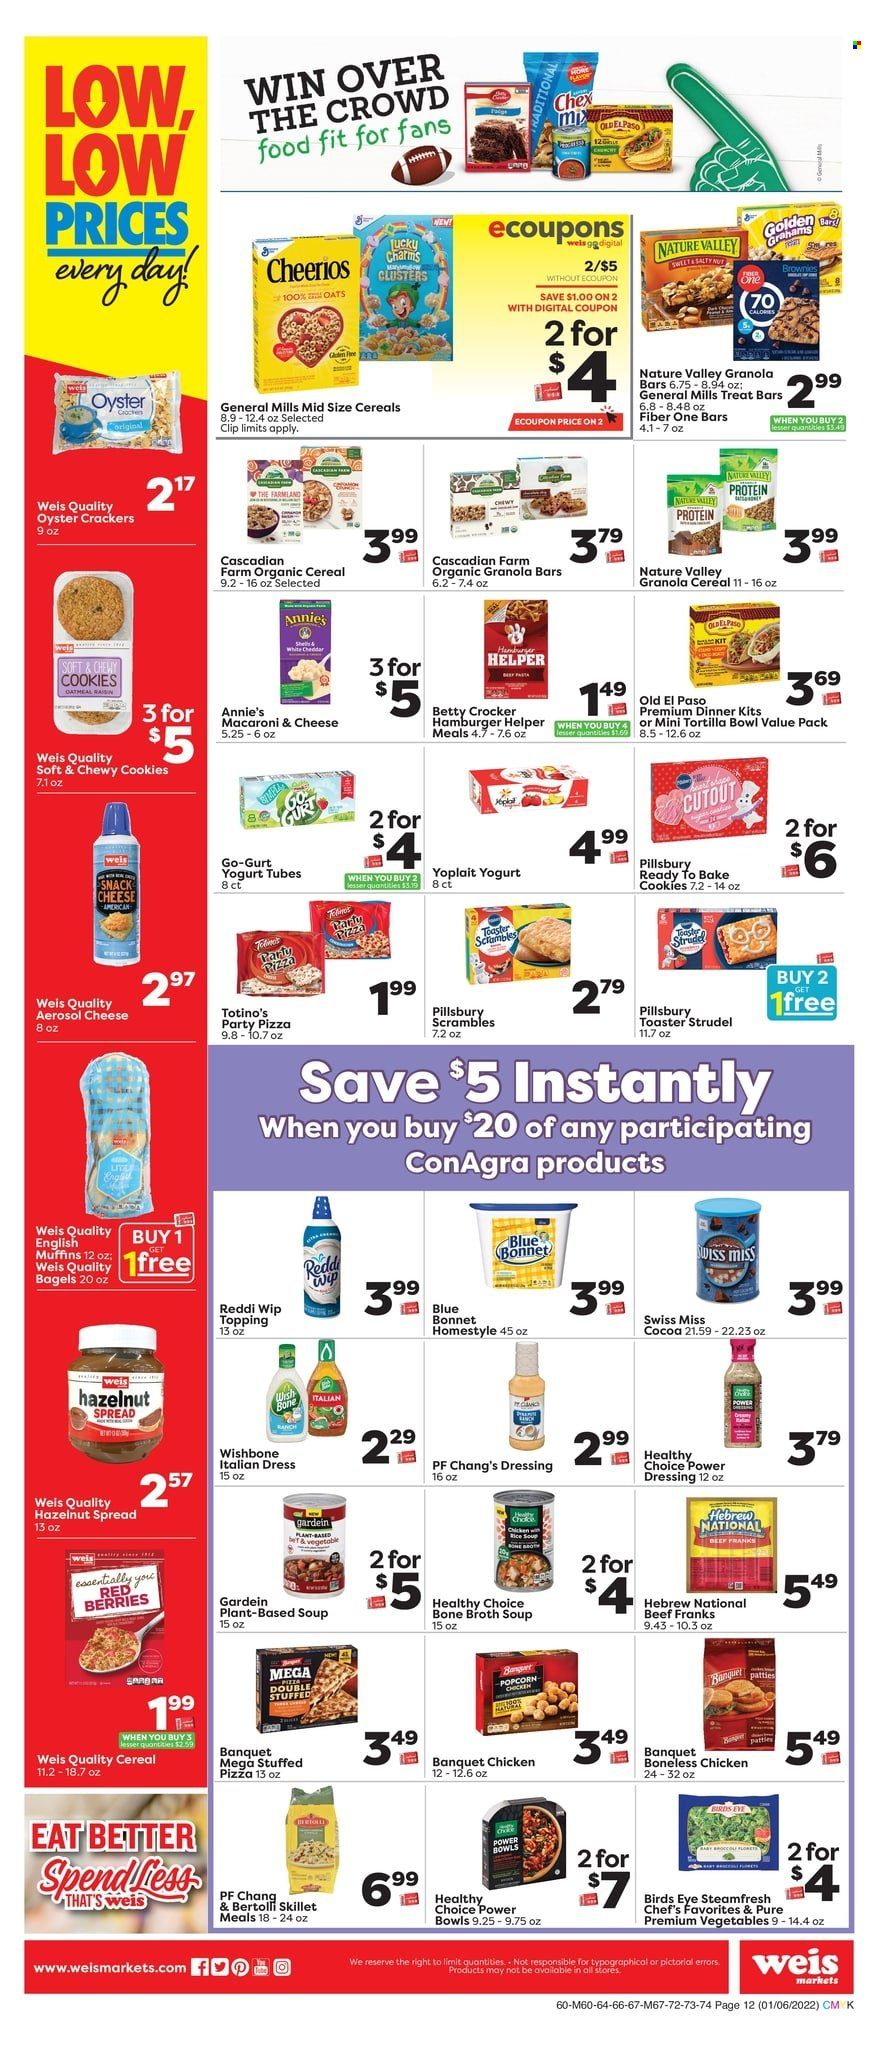 thumbnail - Weis Flyer - 01/06/2022 - 02/03/2022 - Sales products - bagels, english muffins, tortillas, strudel, Old El Paso, oysters, macaroni & cheese, pizza, soup, Pillsbury, Bird's Eye, dinner kit, Healthy Choice, Annie's, Bertolli, yoghurt, Yoplait, Swiss Miss, cookies, snack, crackers, popcorn, Chex Mix, cocoa, oats, topping, oyster crackers, Cheerios, granola bar, Nature Valley, Fiber One, dressing, hazelnut spread. Page 11.